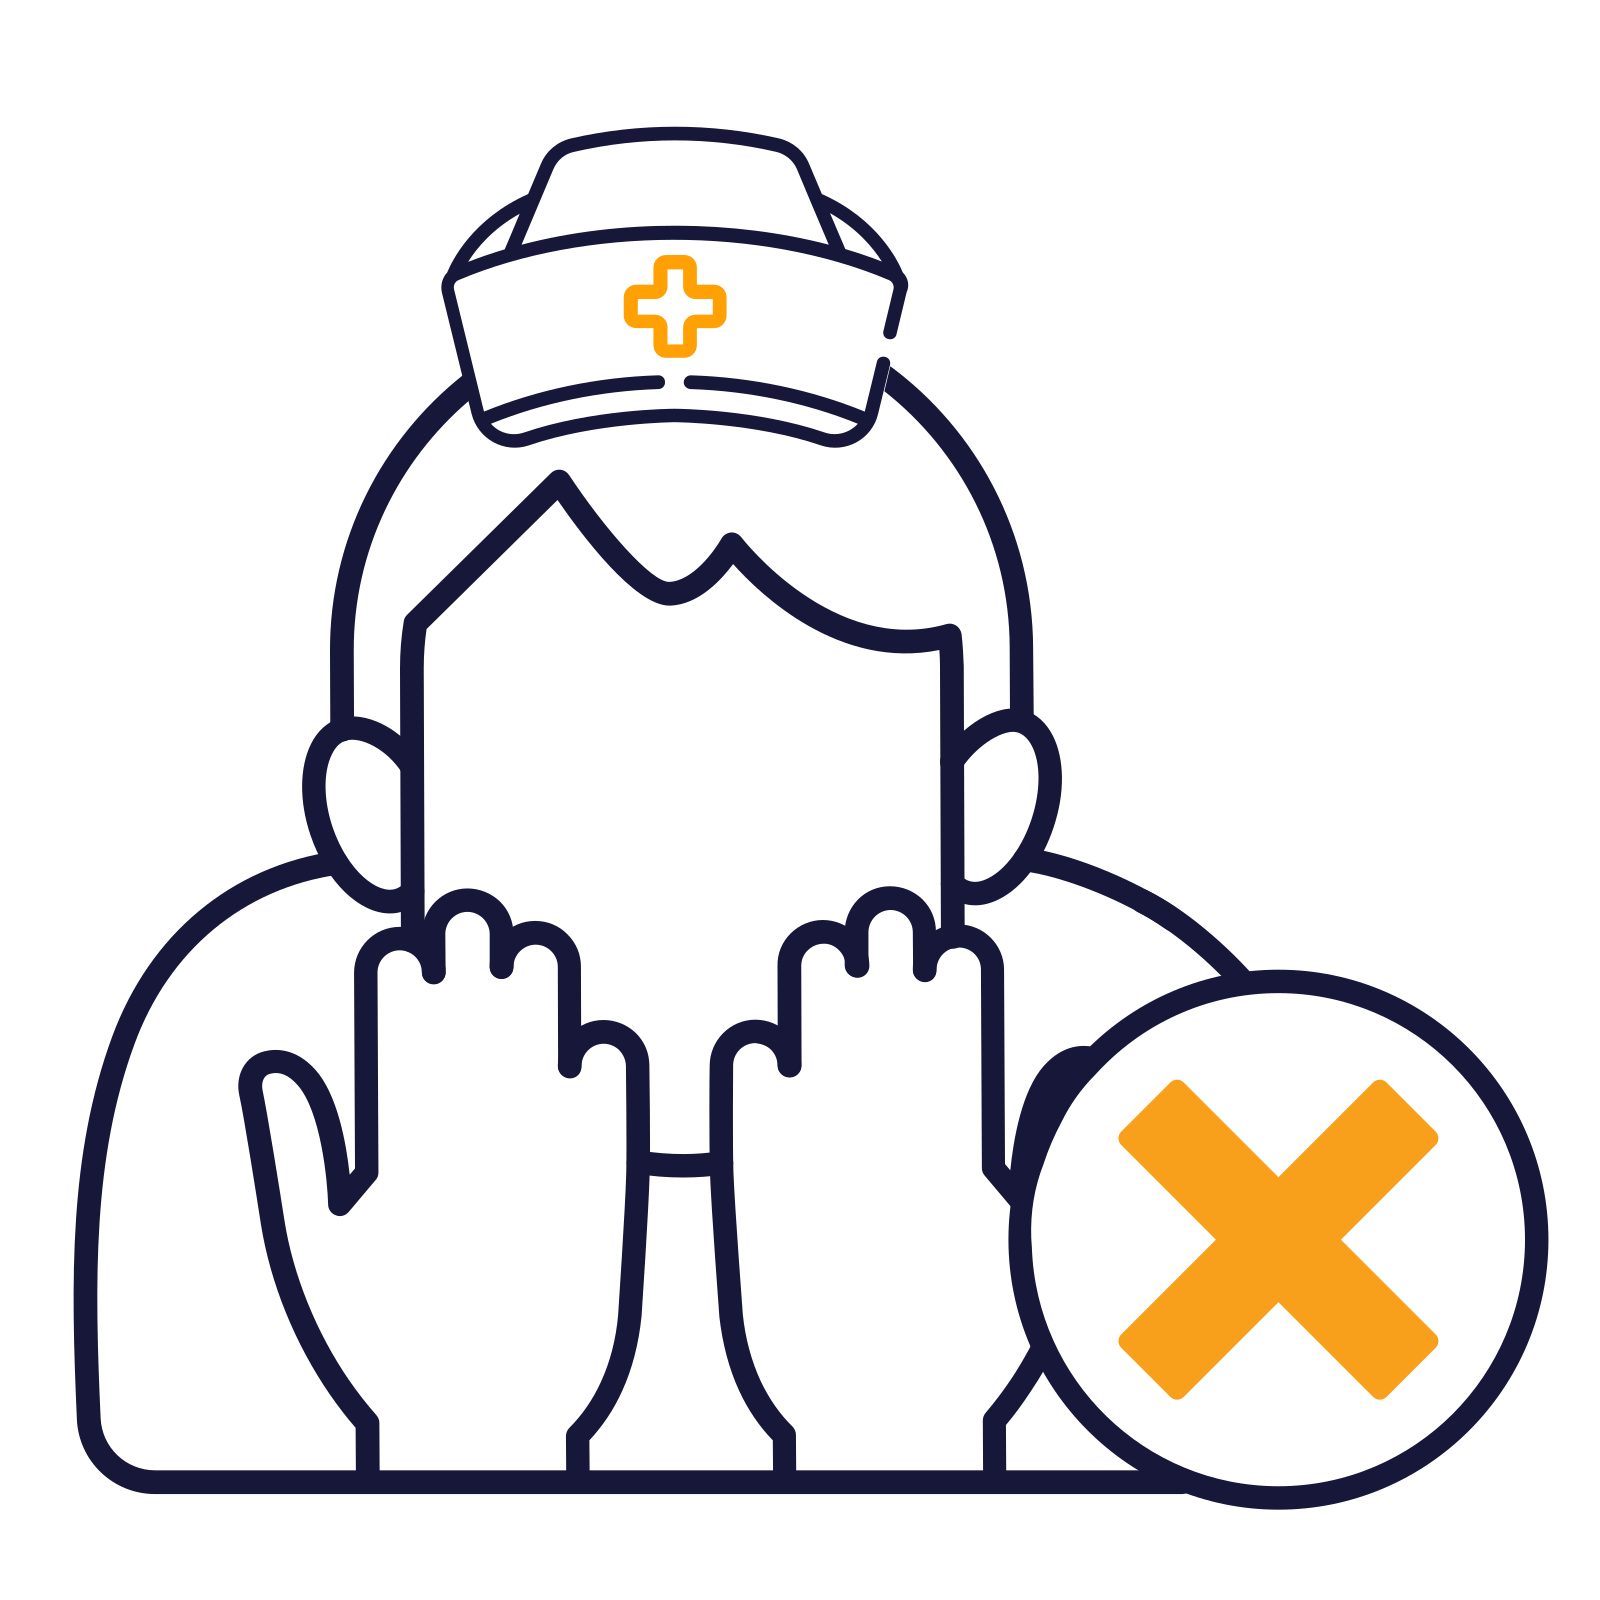 An-icon-that-depicts-nursing-home-injury-abuse